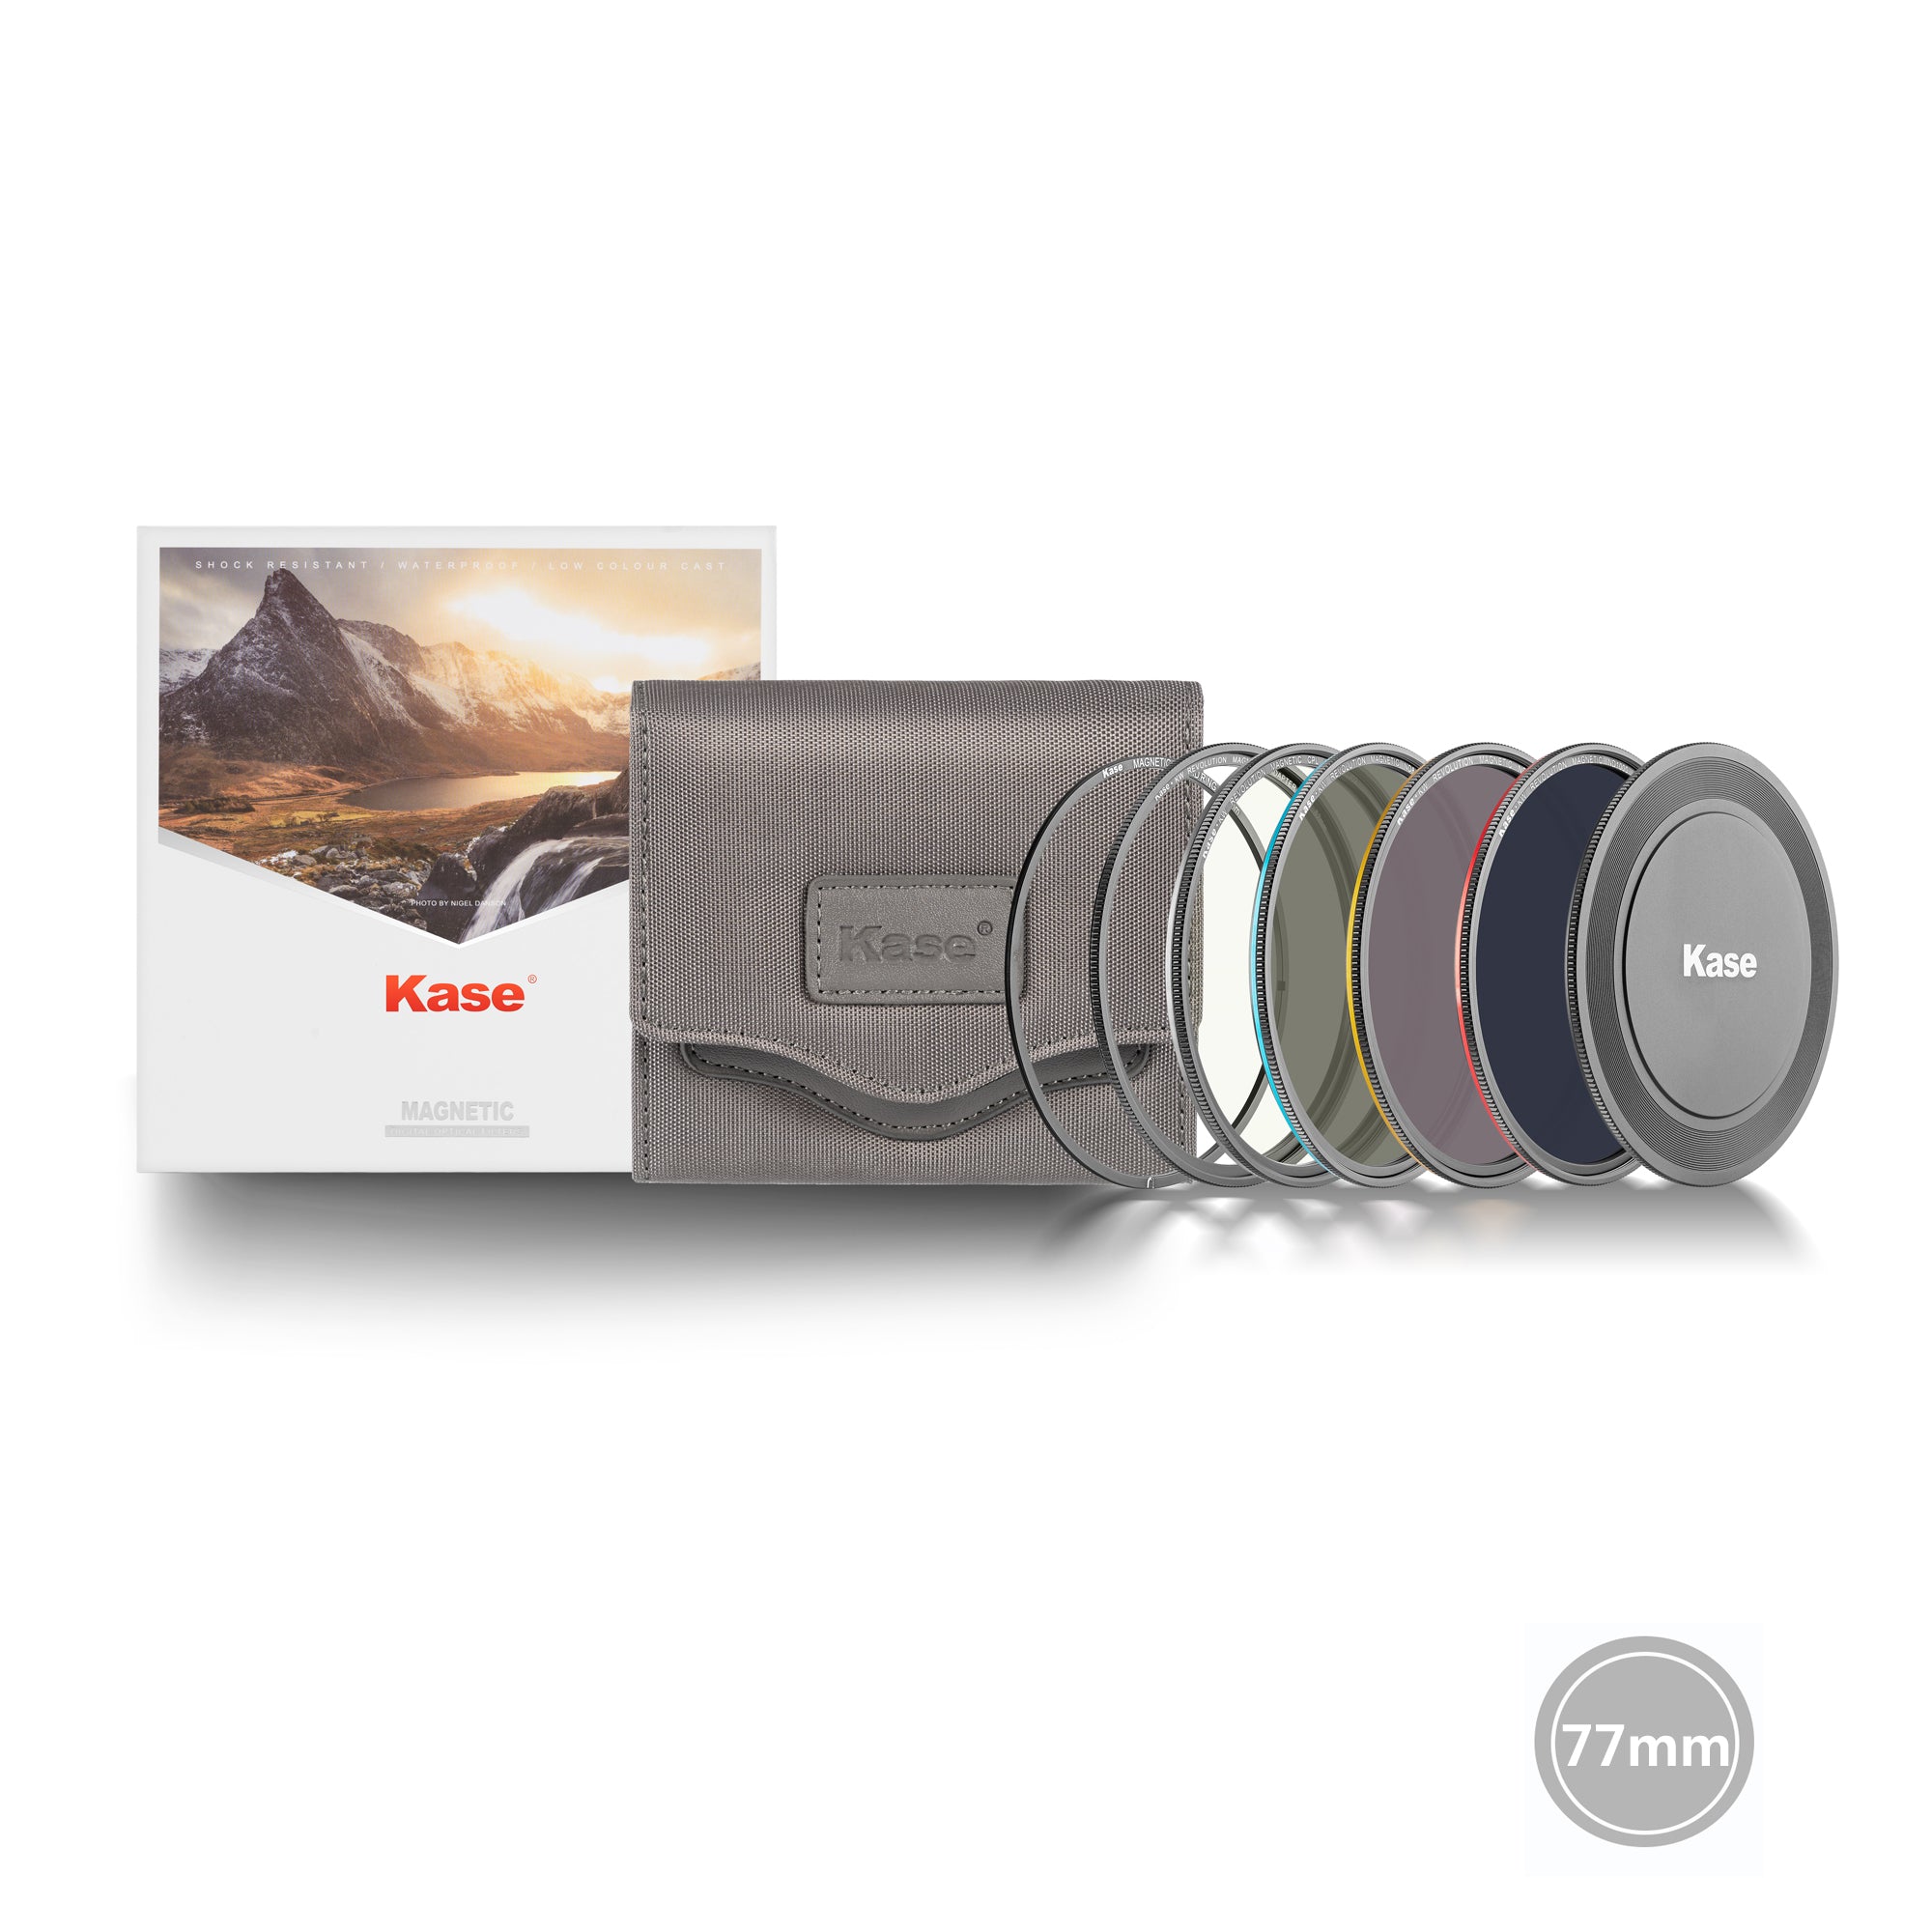 Product Image of Kase Revolution Magnetic Circular Filters 77mm Pro Kit